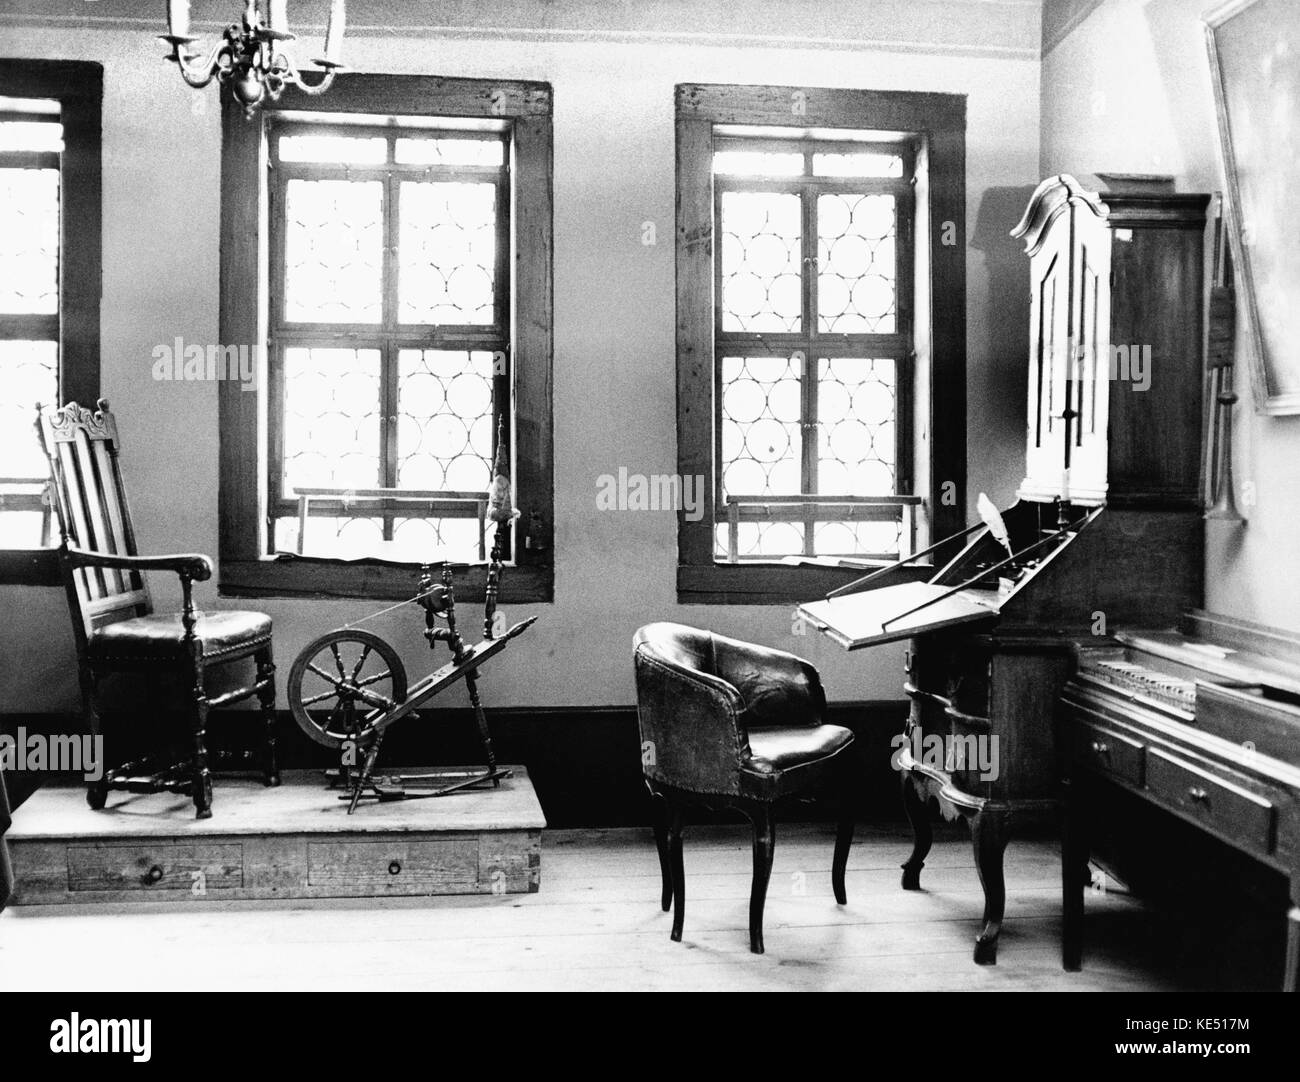 Johann Sebastian Bach - exhibition on the life of the German composer 's family, at his house in Eisenach (near Erfurt, Germany),  Spinning wheel, desk, & chair. Interior. JSB: 21 March 1685 - 28 July 1750. Stock Photo